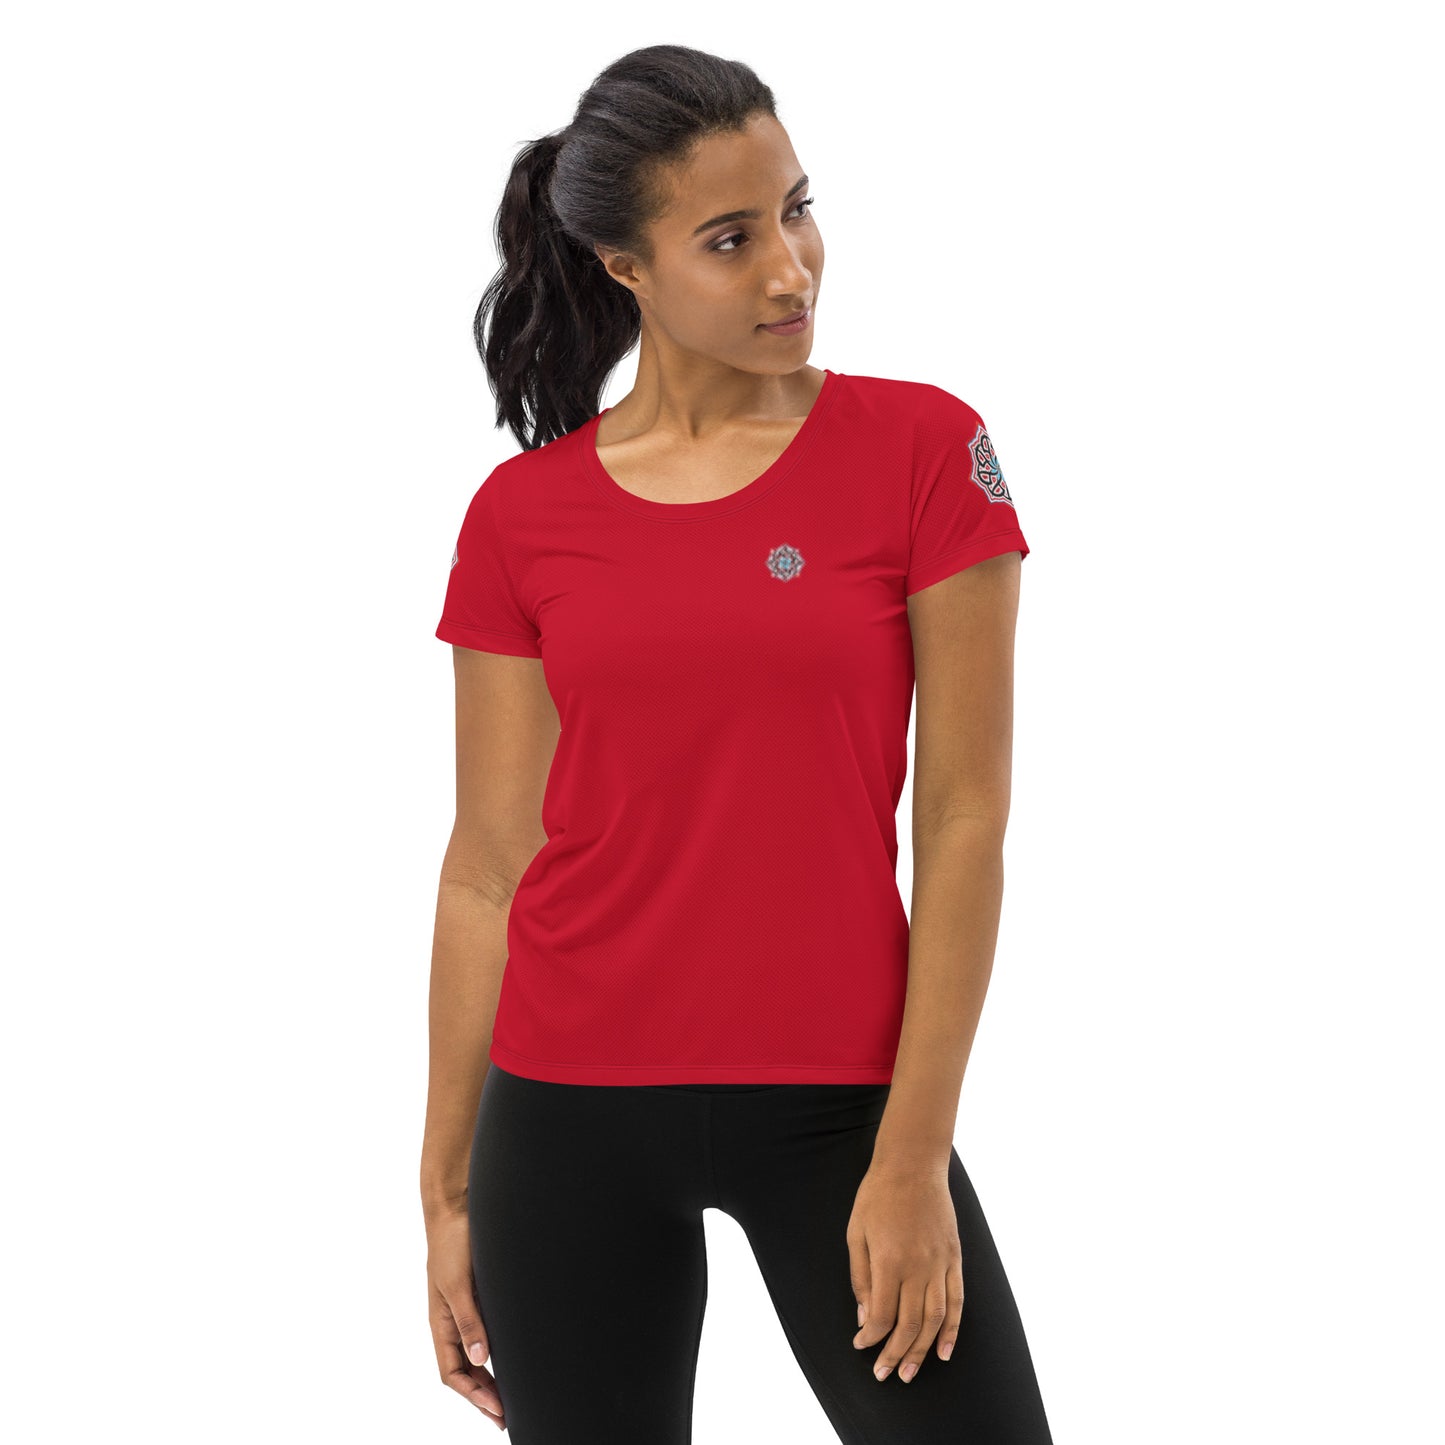 Arabian Summer Dream - All-Over Print Women's Athletic T-shirt by Craitza© Red Edition